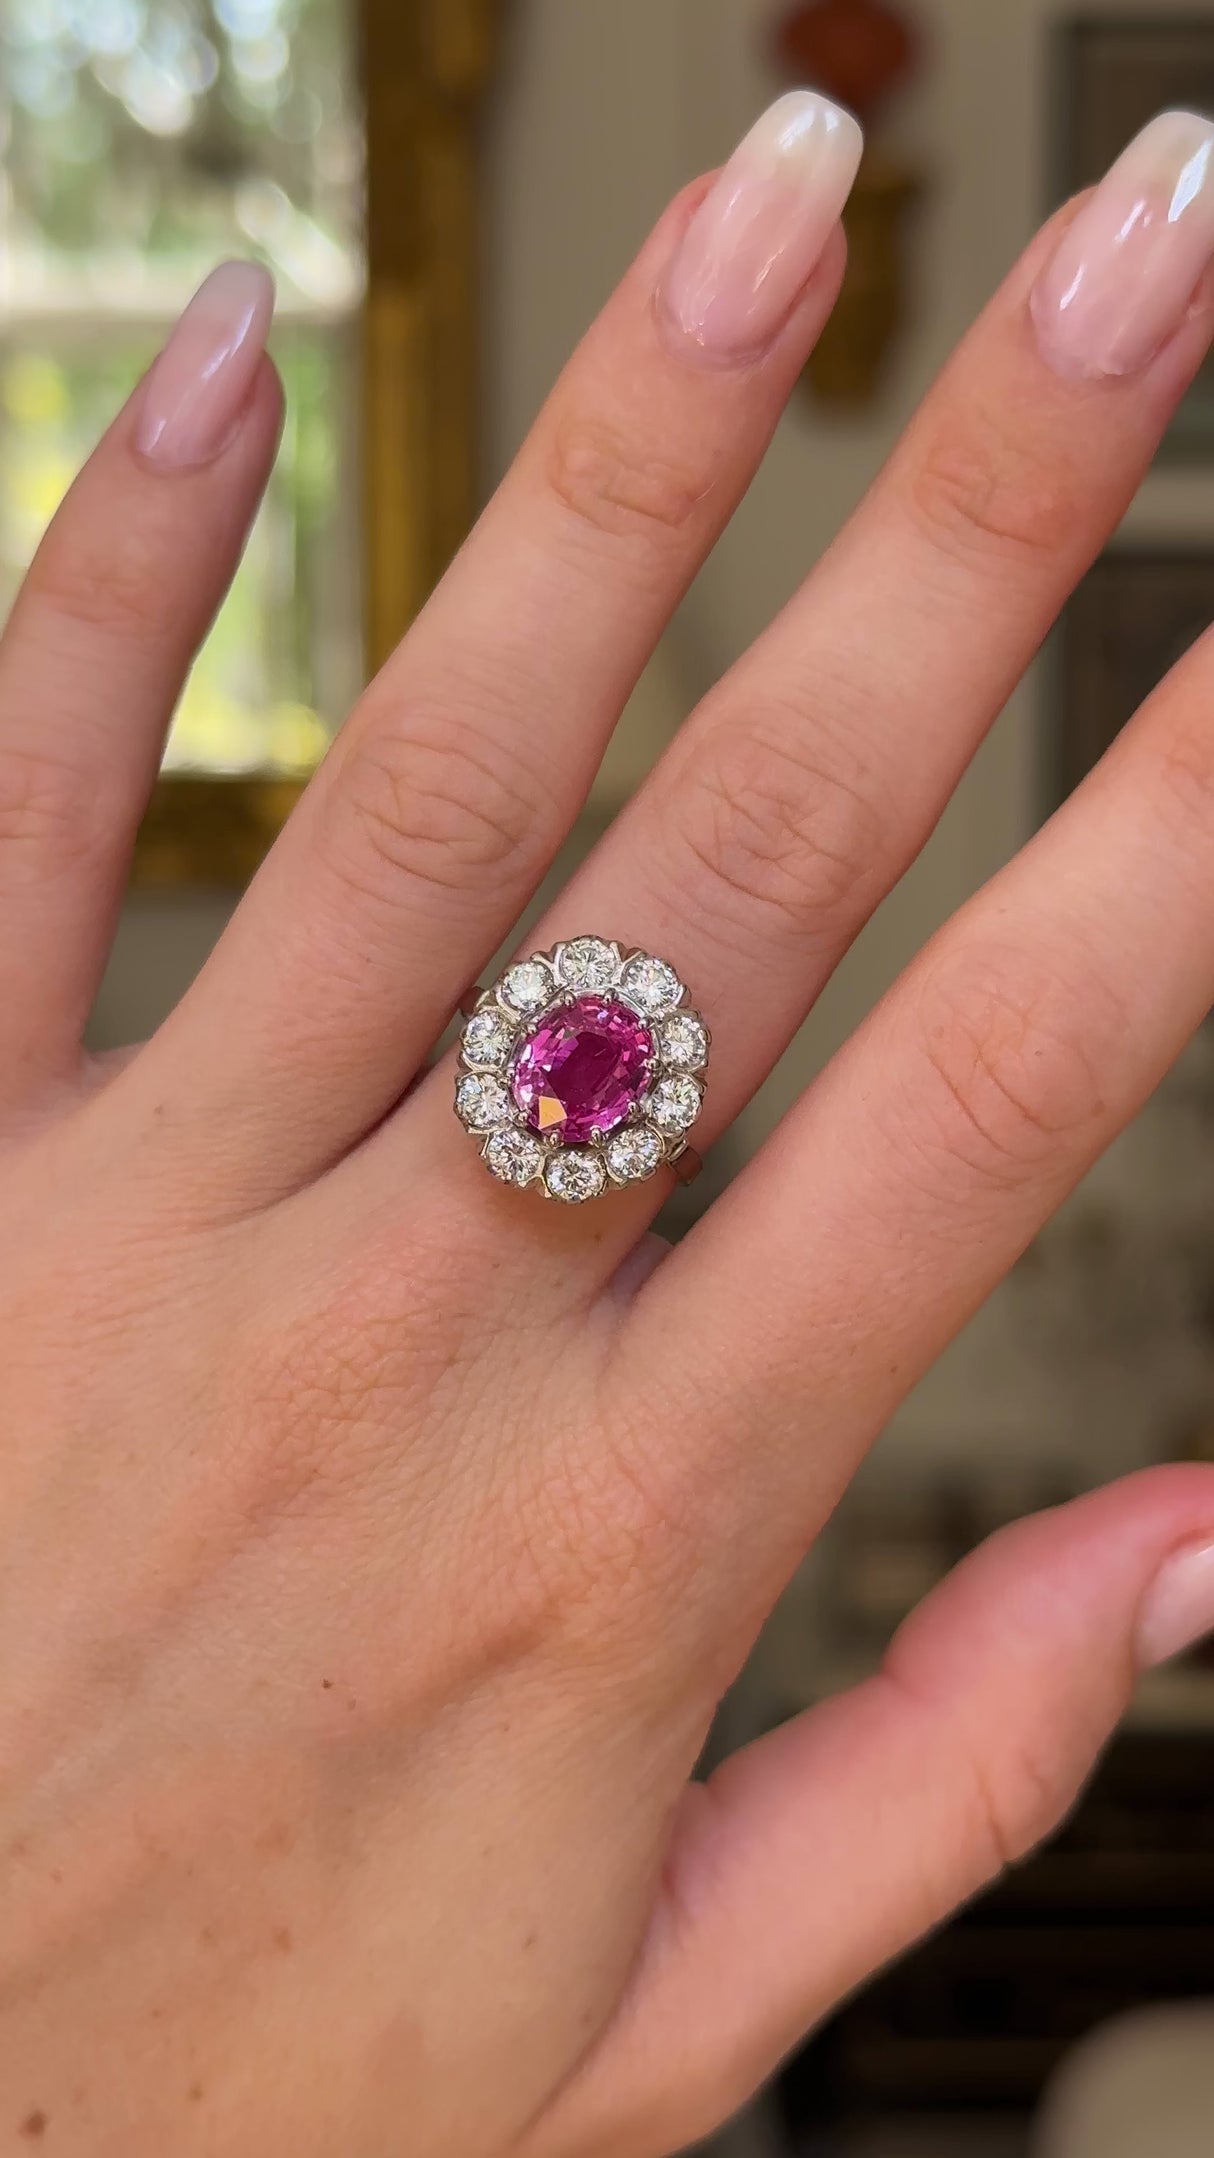 Pink sapphire and diamond cluster ring worn on hand and moved around to give perspective.